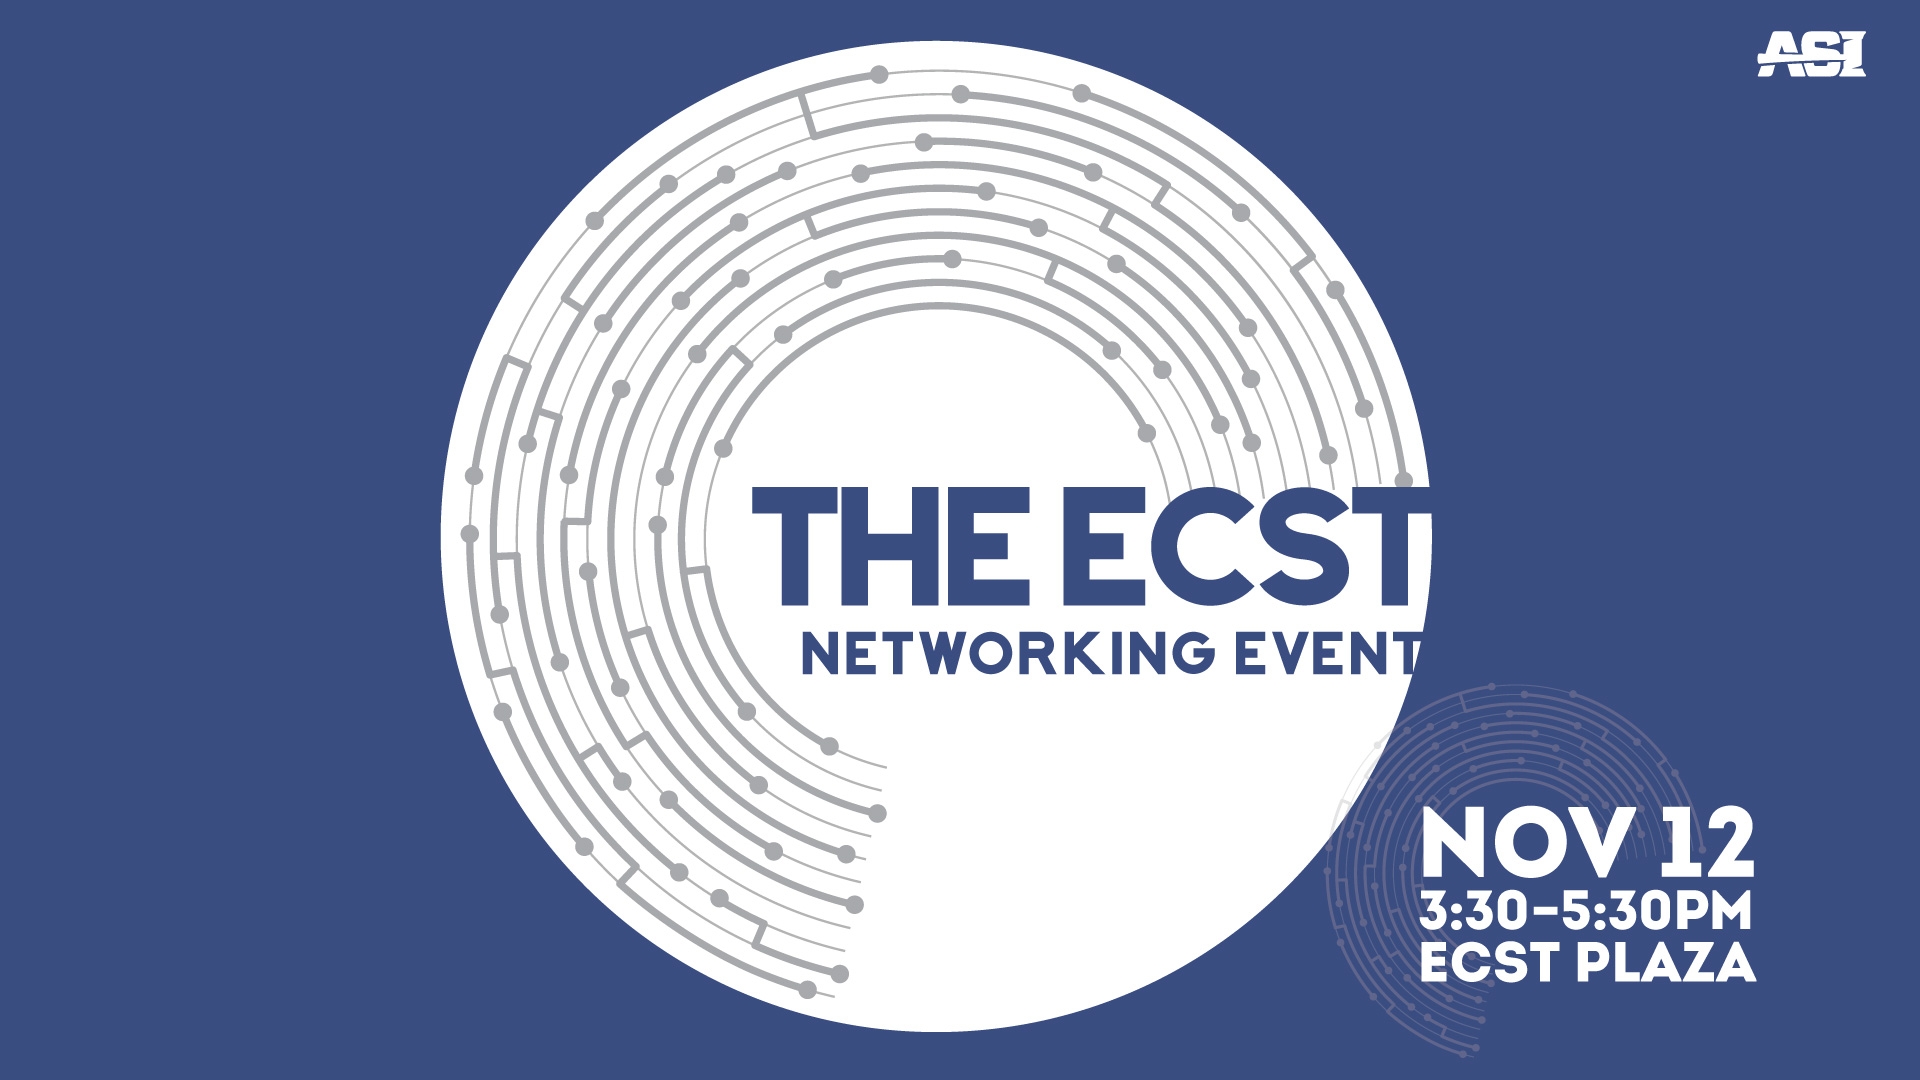 The ECST event